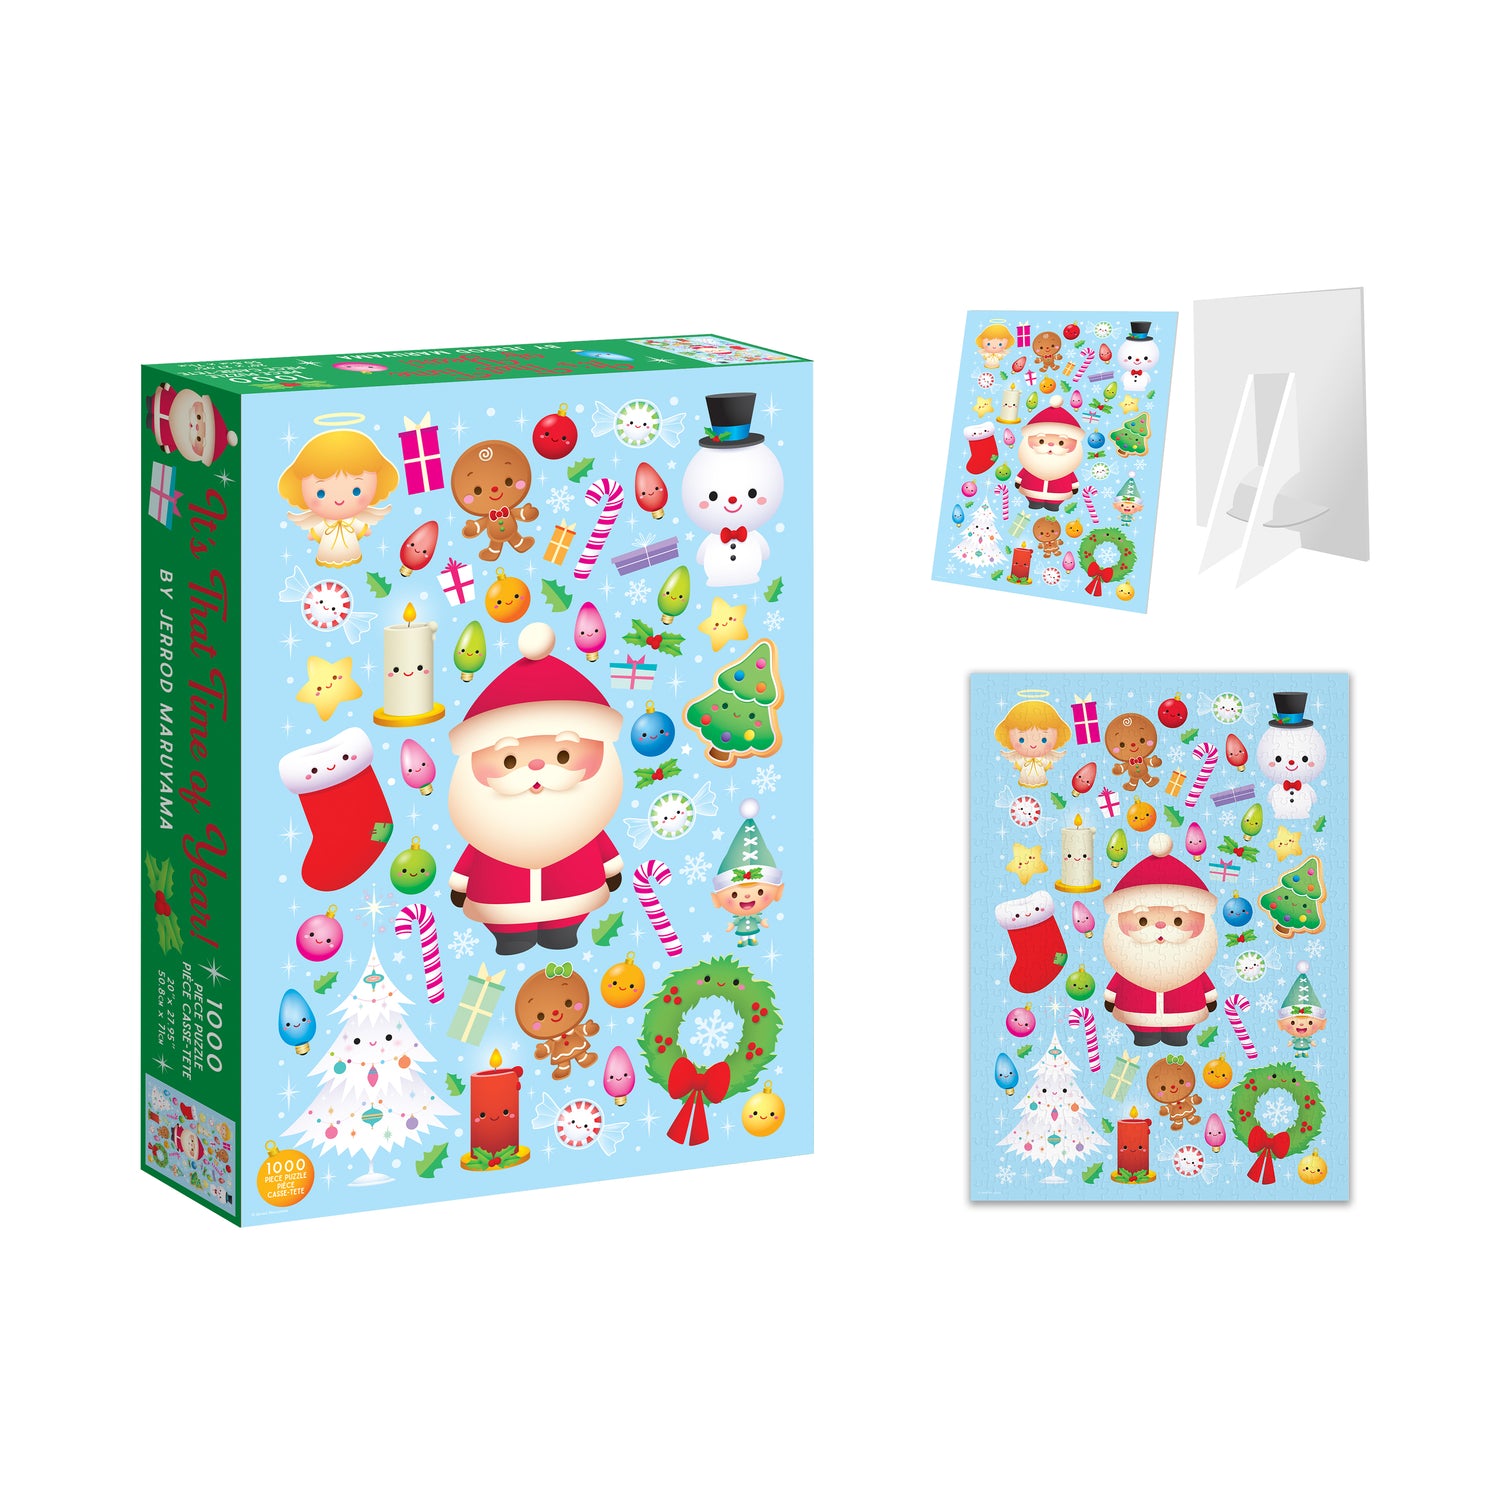 It's That Time of Year! by Jerrod Maruyama - 1000 pc Jigsaw Puzzle ...